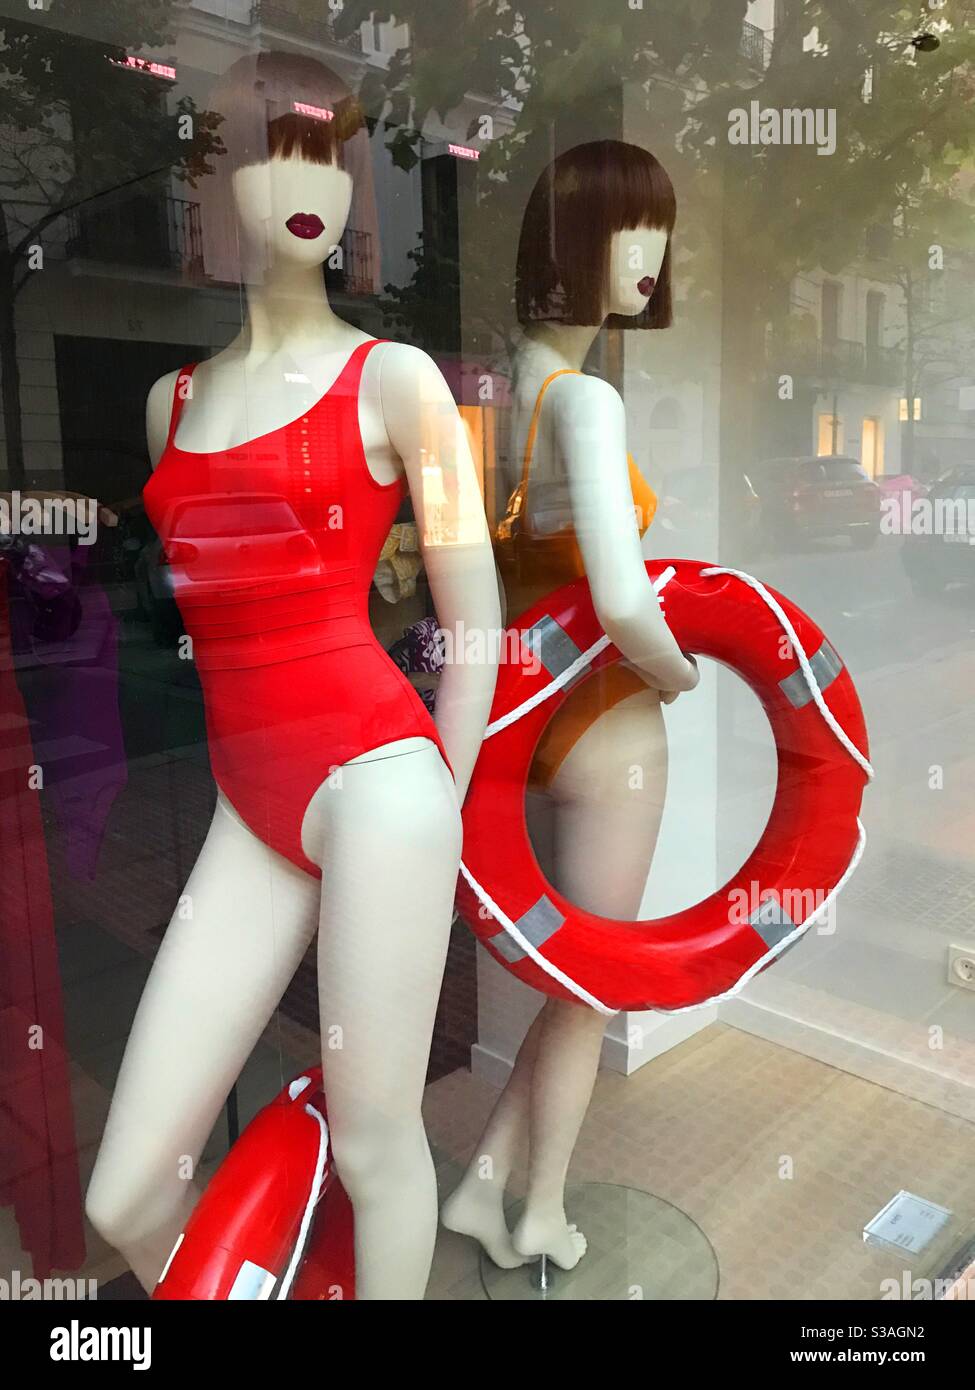 Mannequins wearing red swimsuits in a shop window Stock Photo